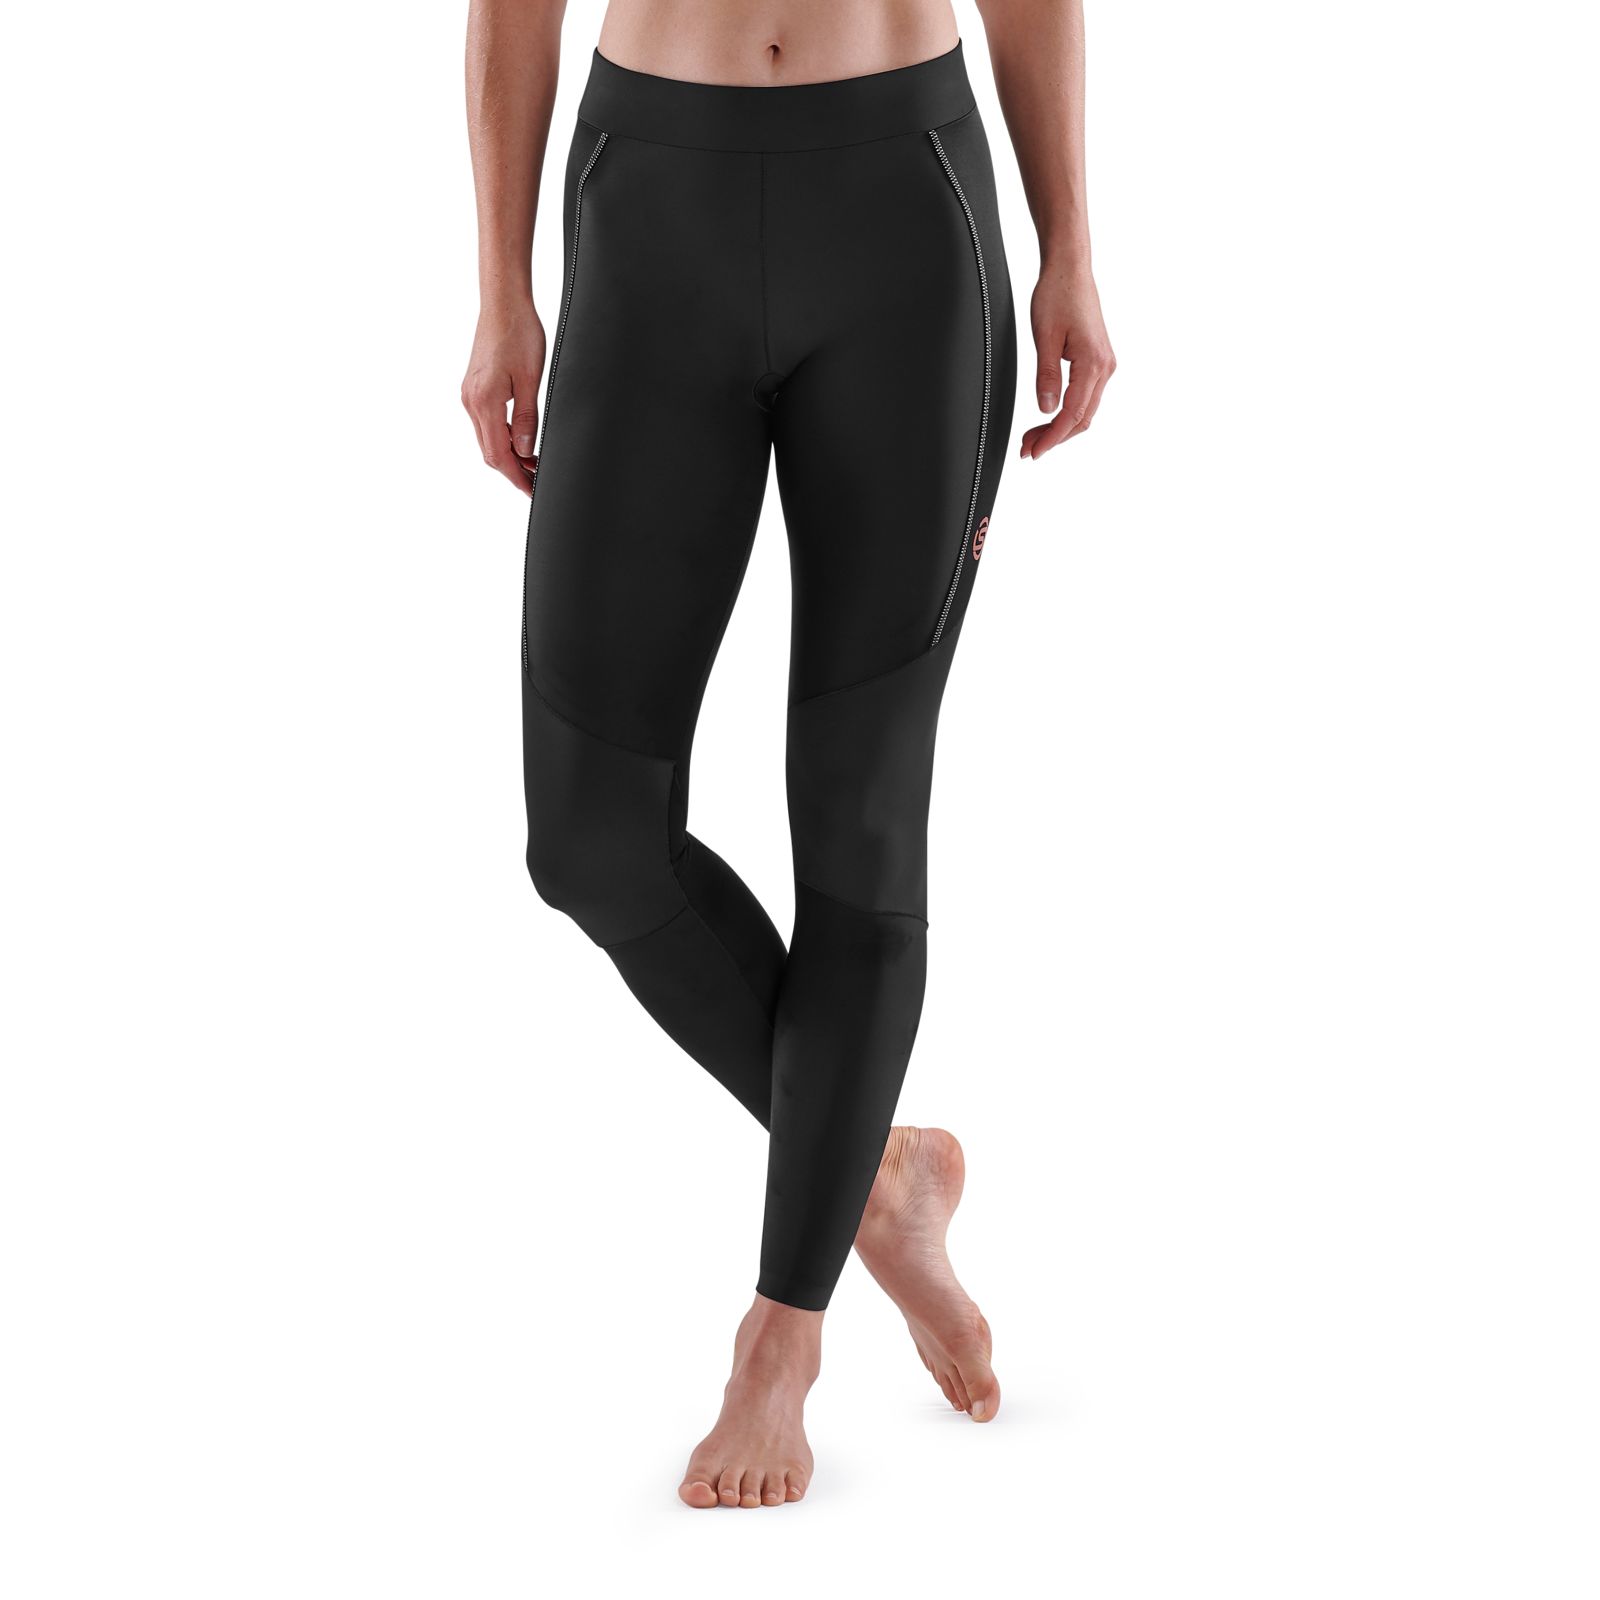 Skins Women's RY400 Compression Recovery Tights Dominican Republic